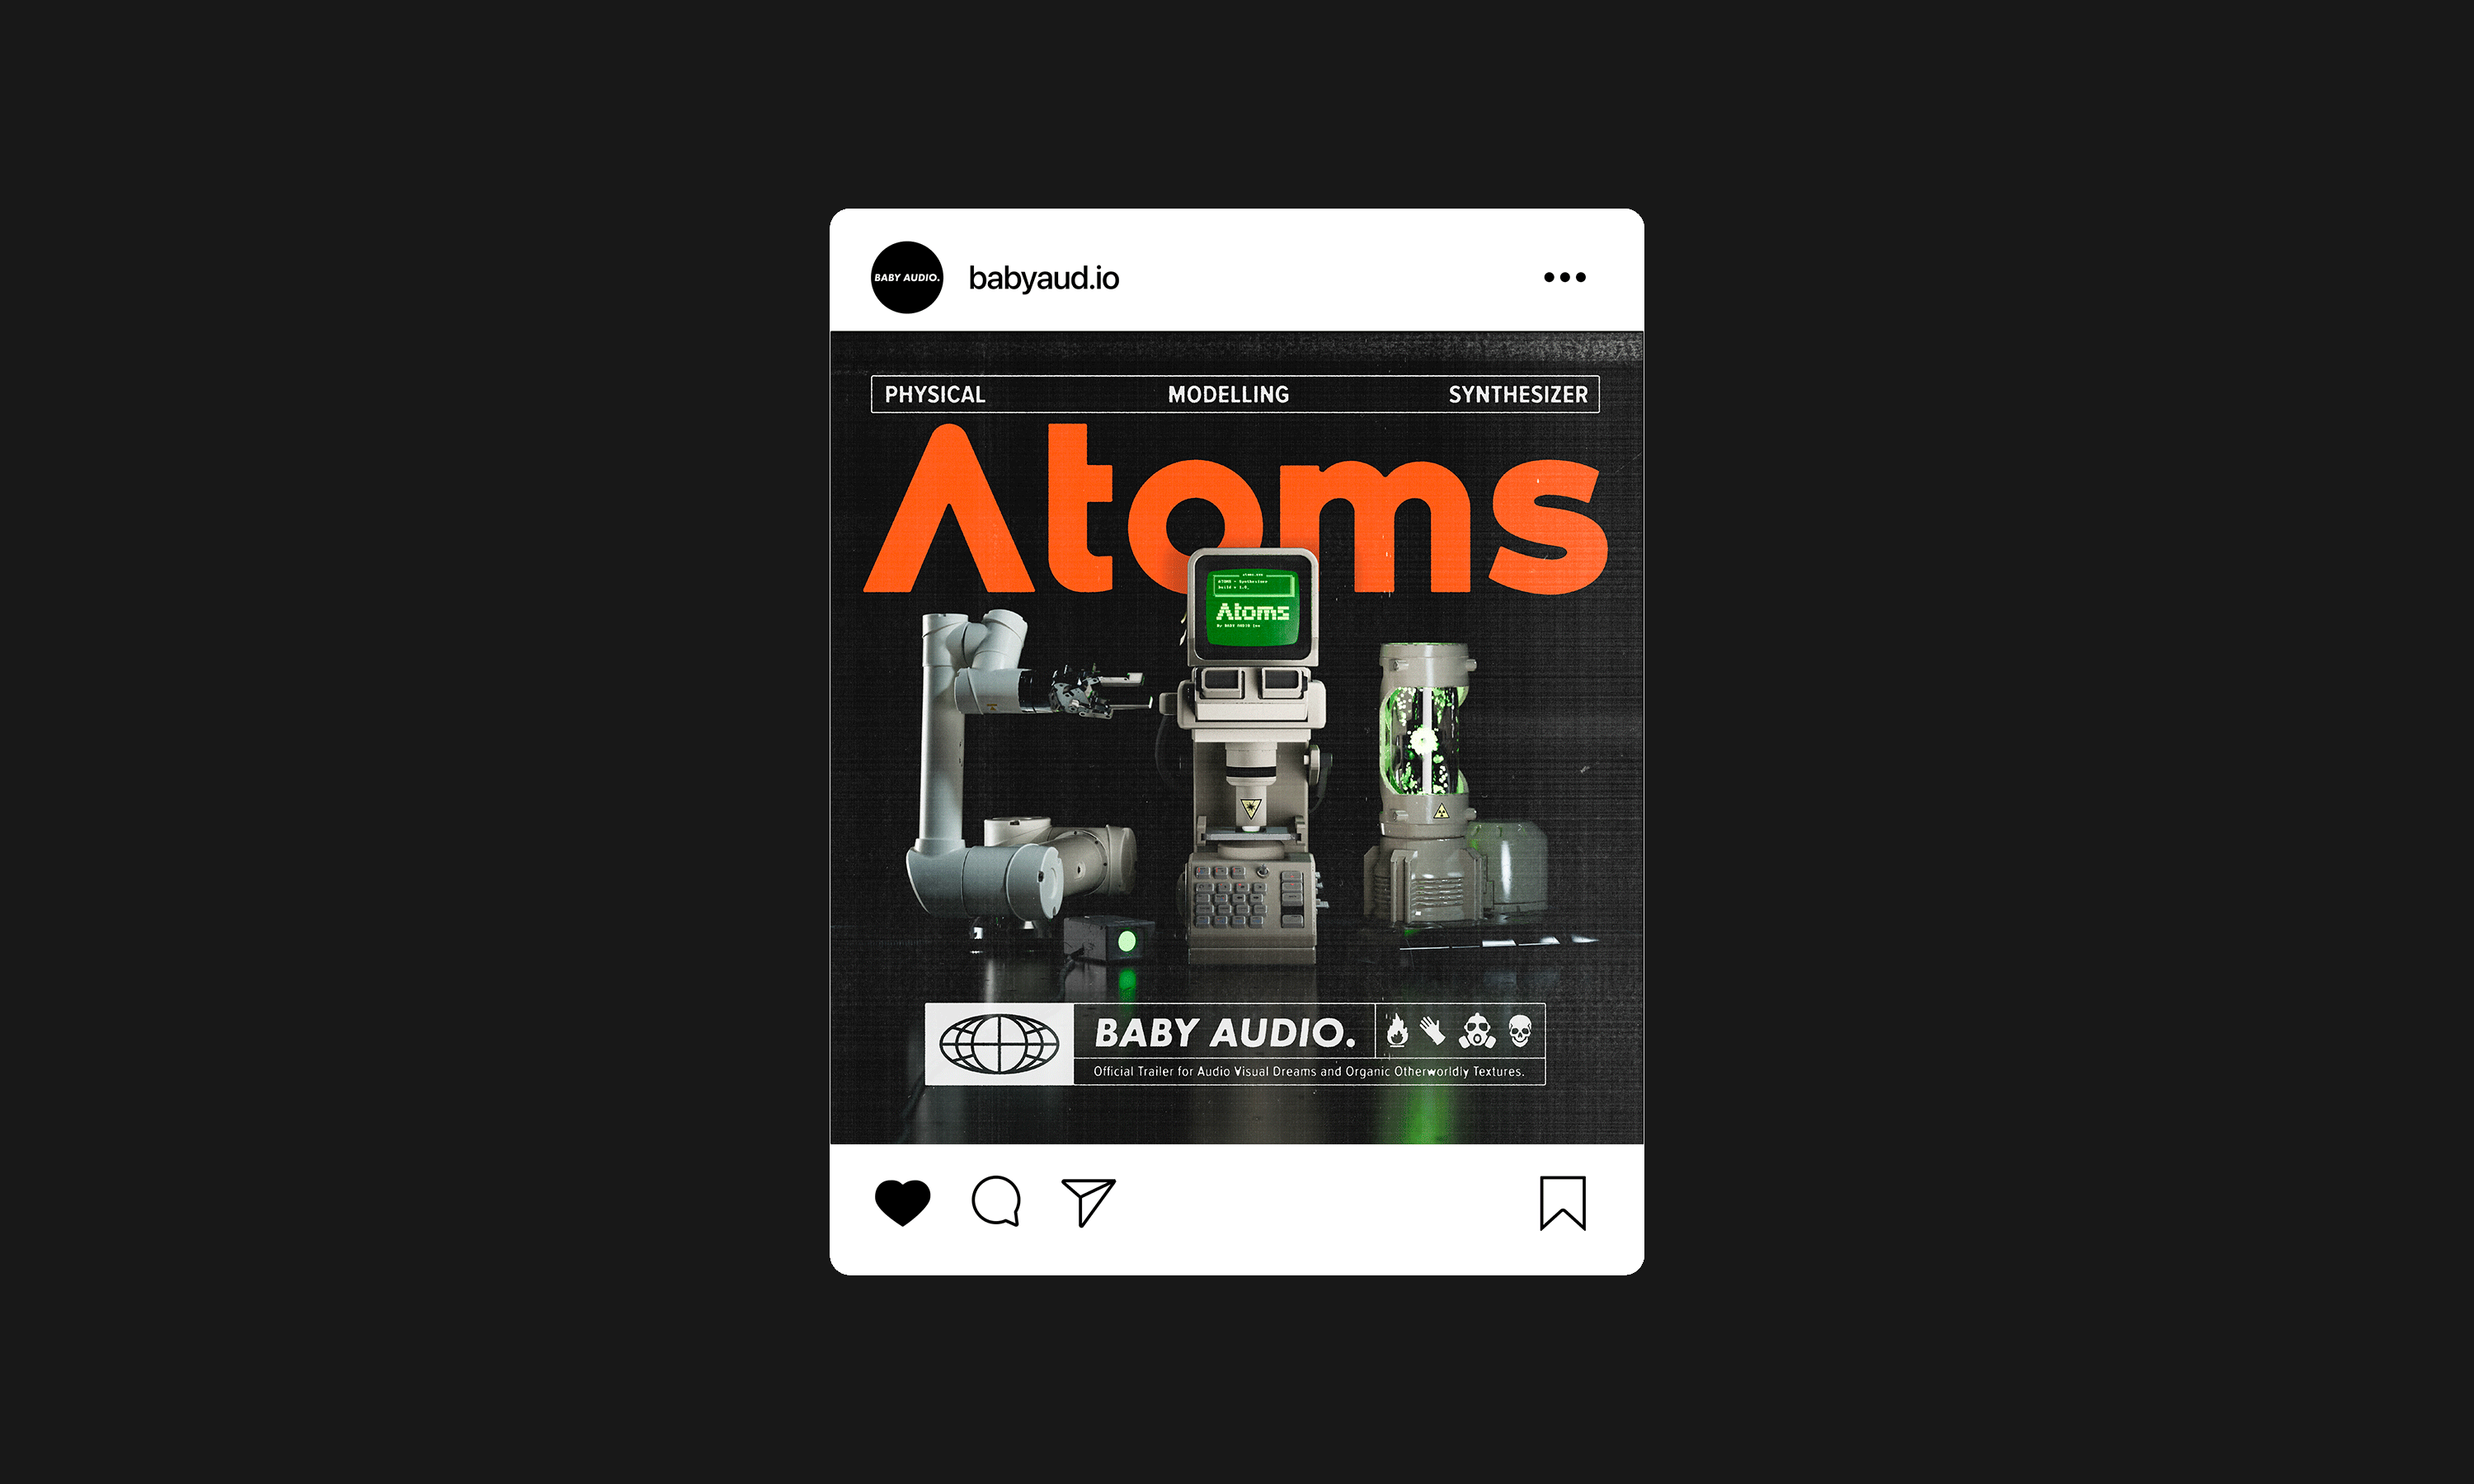 Atoms by Baby Audio Instagram post